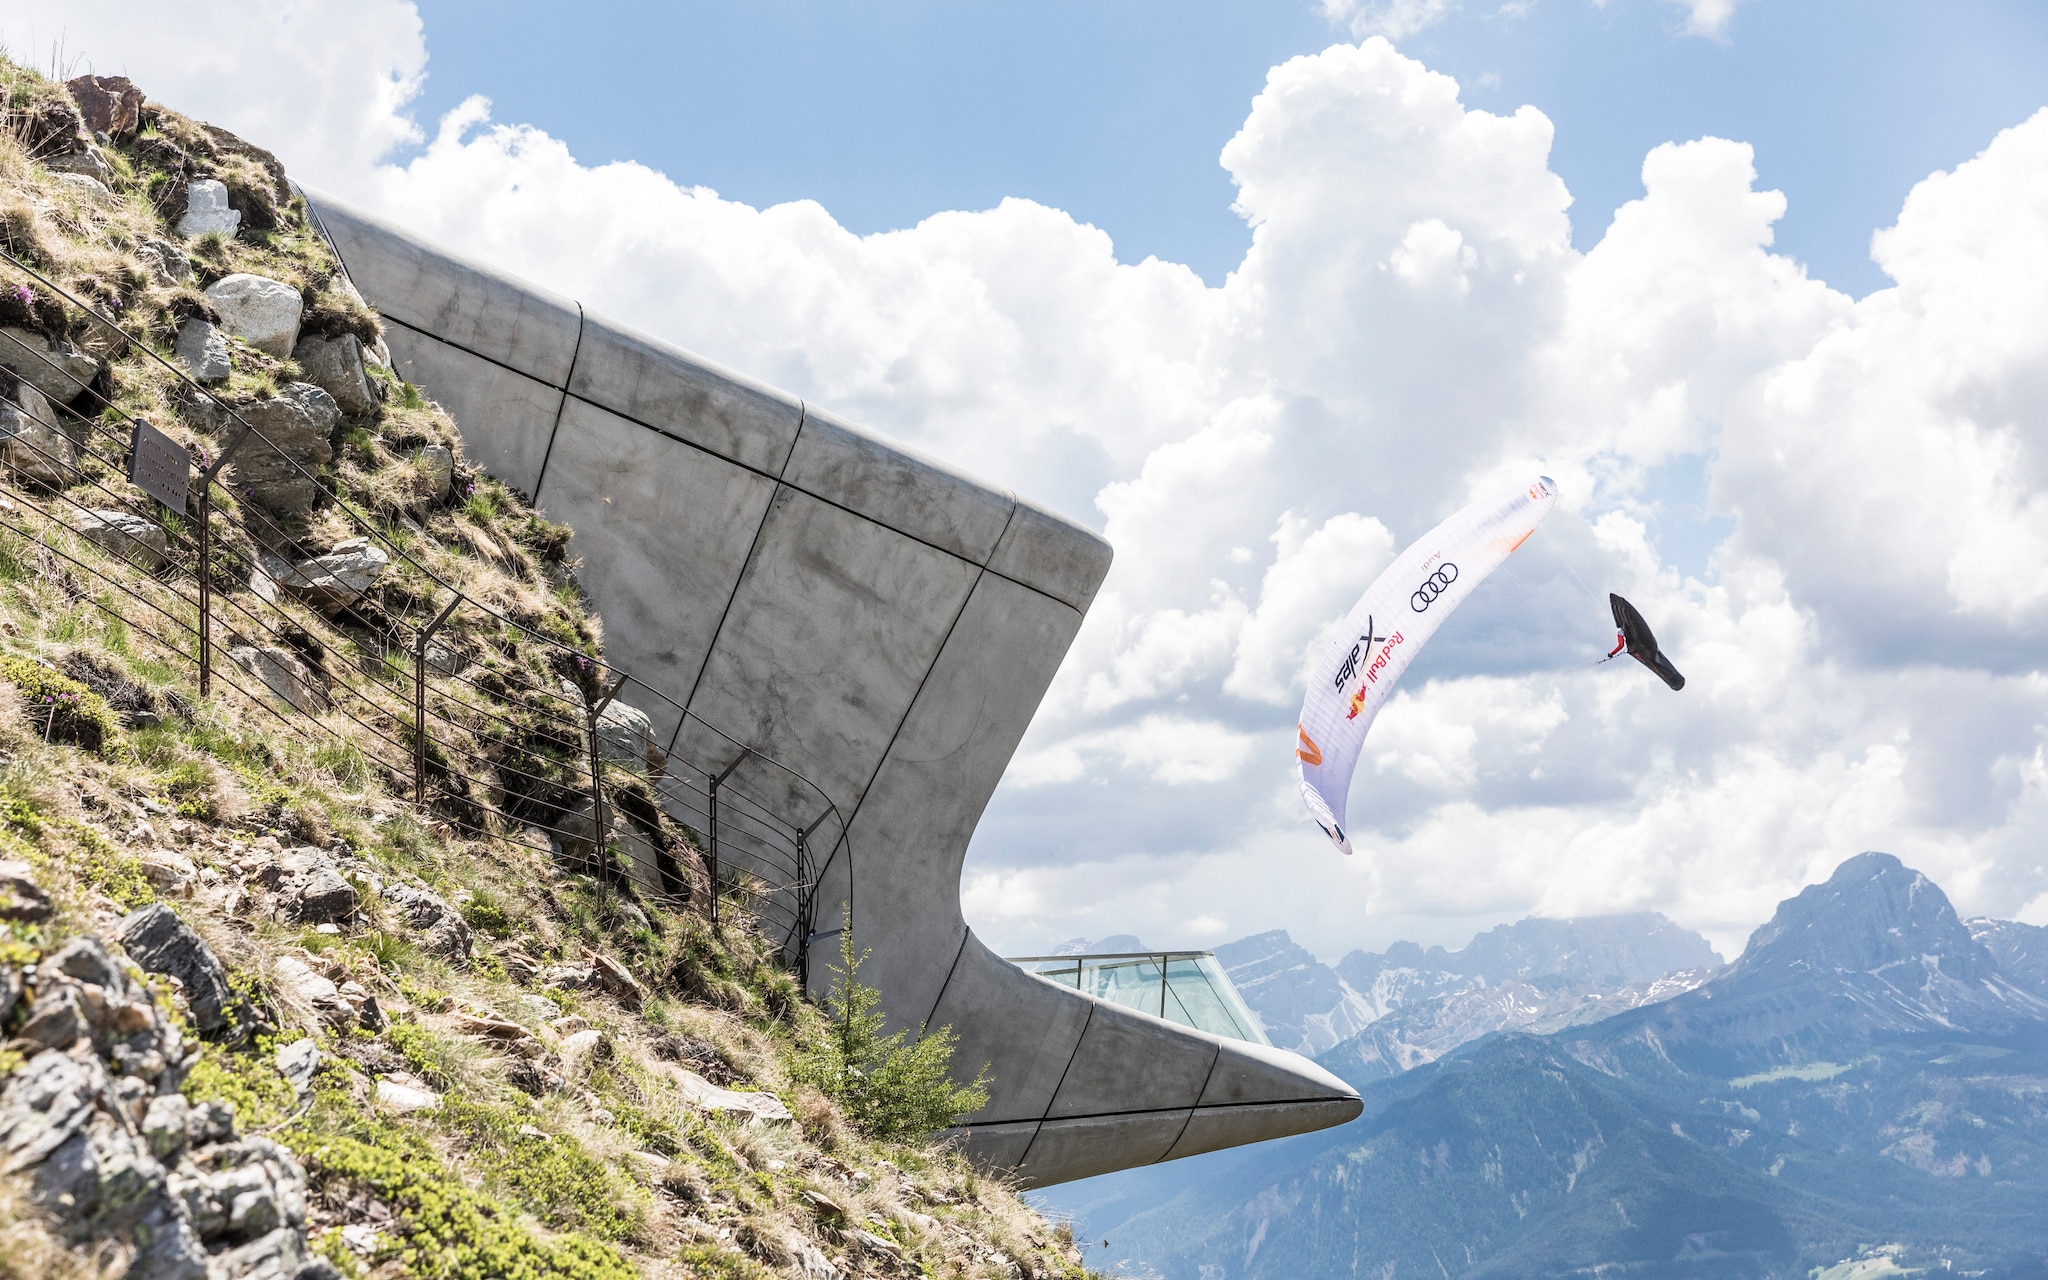 Paul Guschlbauer at Turnpoint 4, Kronplatz, Italy during Red Bull X-Alps at on June 18, 2019. © Harald Tauderer / zooom